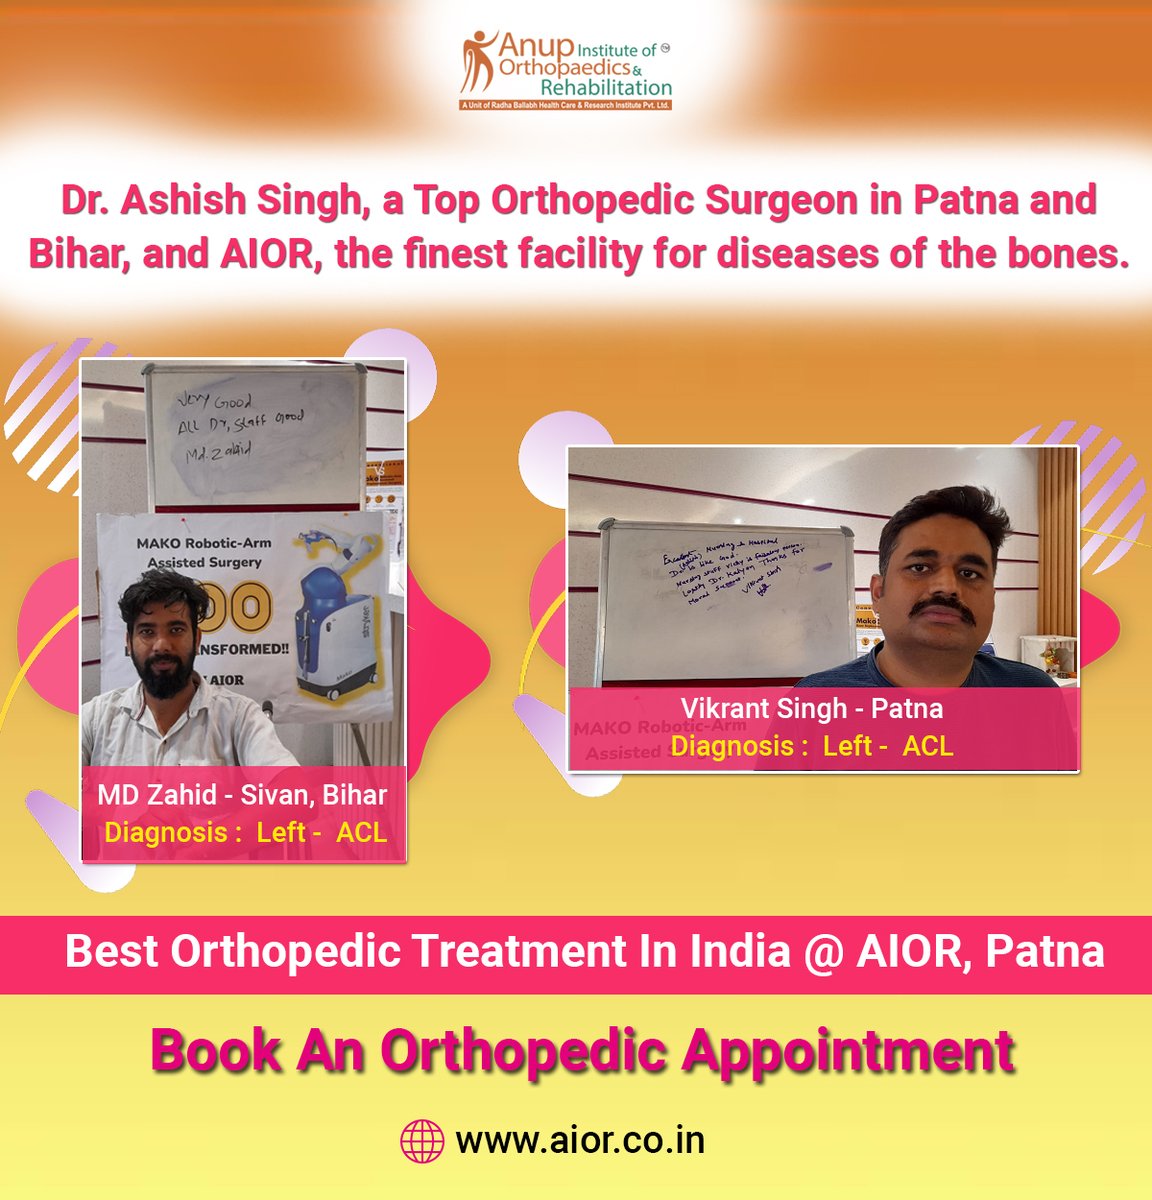 Dr. Ashish Singh, a Top Orthopedic Surgeon in Patna and Bihar, and AIOR, the finest facility for diseases of the bones. 

#patienttestimonials #patientsuccessstories #patientcare #successstories #patientsstory #patientsuccessstory #orthopaedicsurgeon #bestorthotreatment